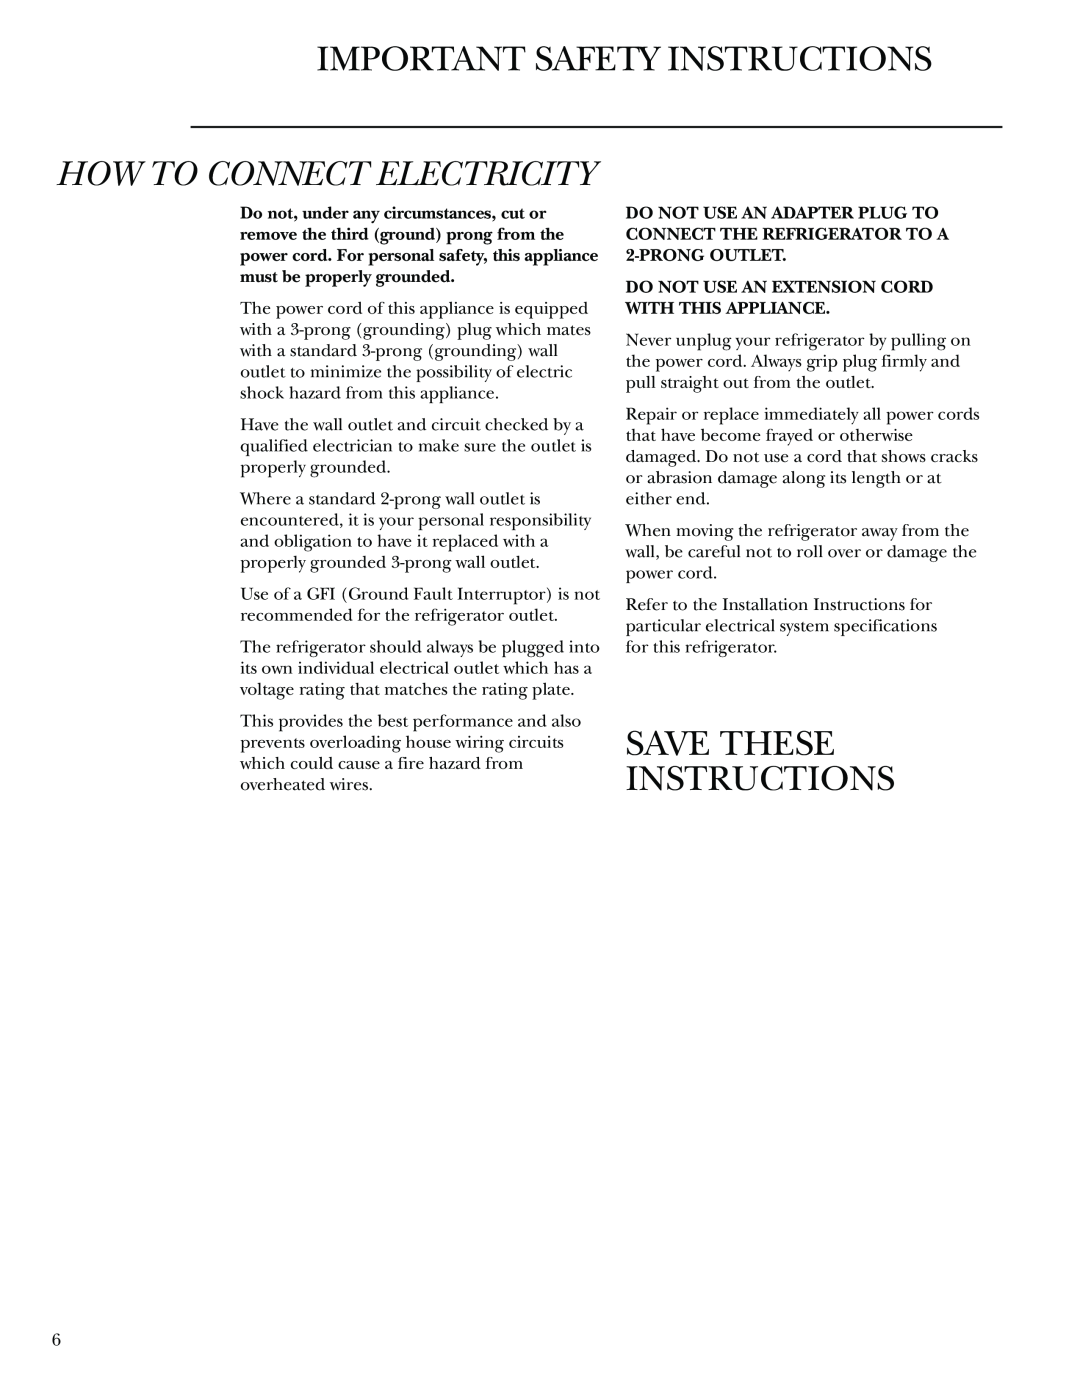 GE Monogram Bottom-Freezer Built-In Refrigerators owner manual How To Connect Electricity, Save These Instructions 